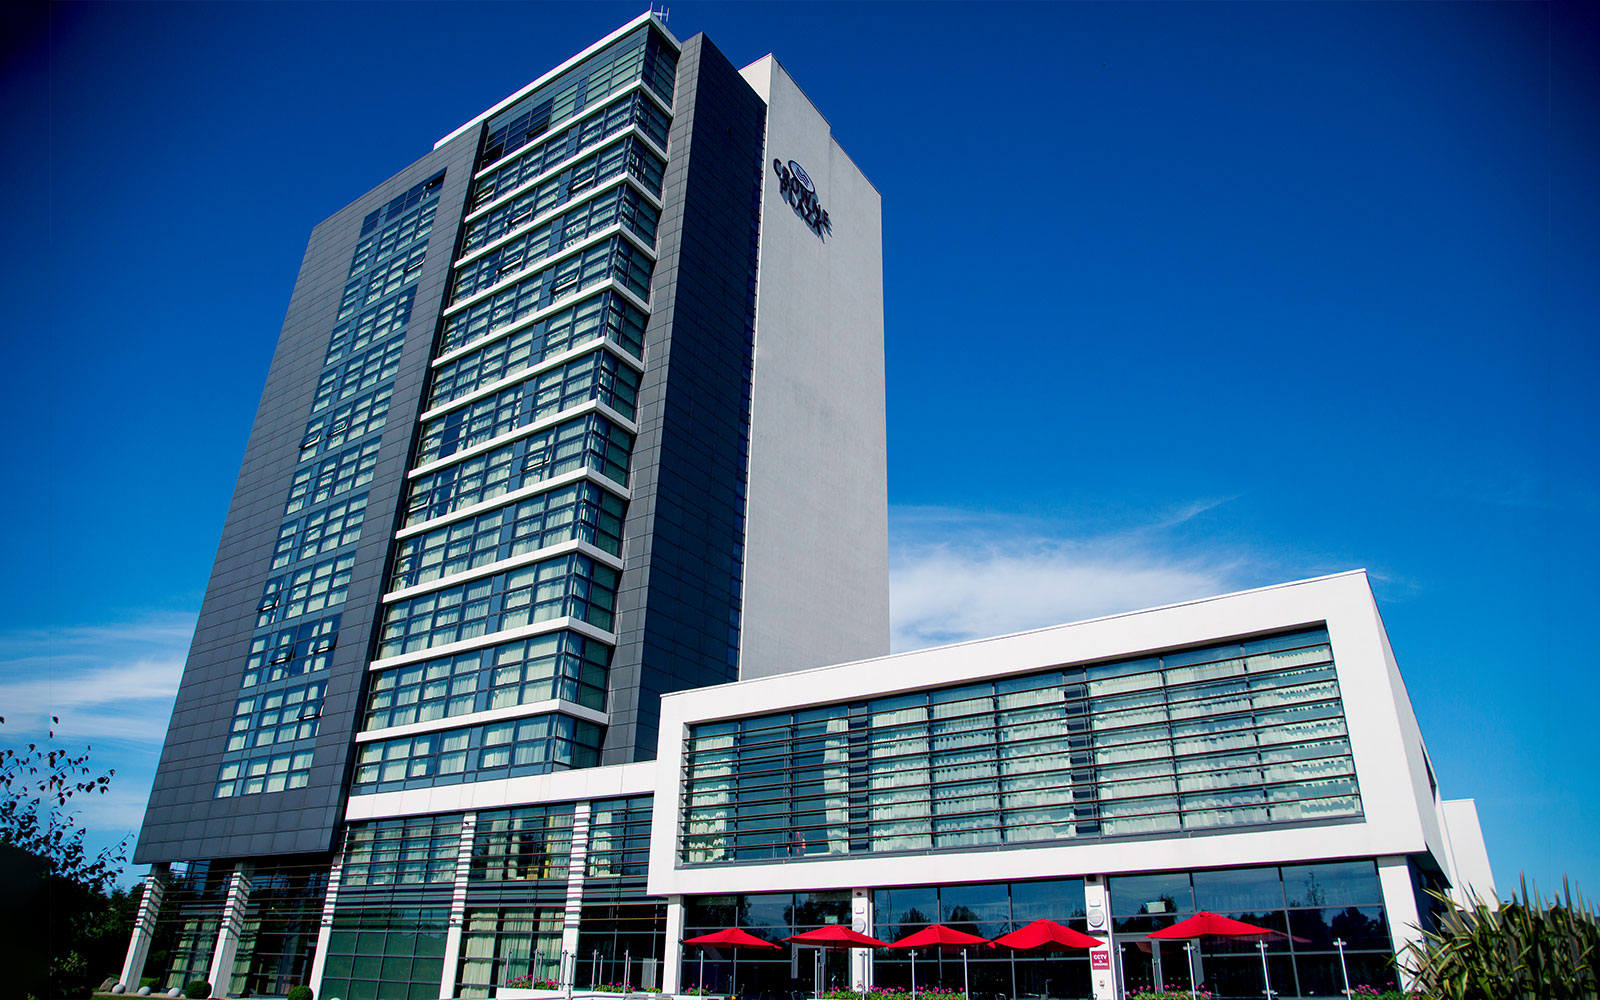 Exterior of Crowne Plaza Dundalk in daylight 